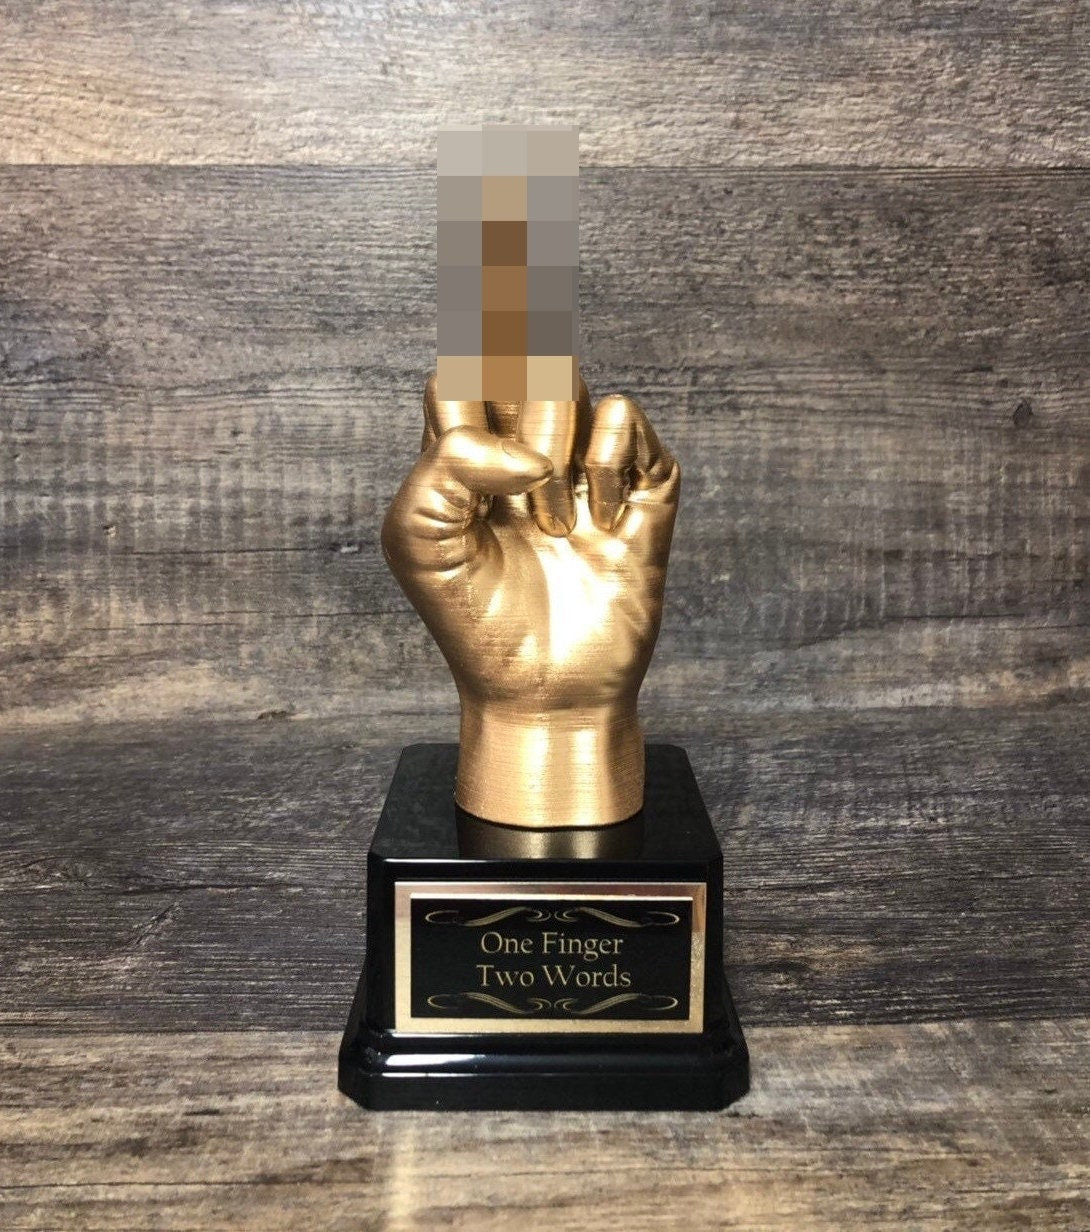 Middle Finger Golf Loser Trophy Hole In One Worst Score Over Par Trophy Funny Flipping The Bird F*ck You Trophy One Finger Two Words Award